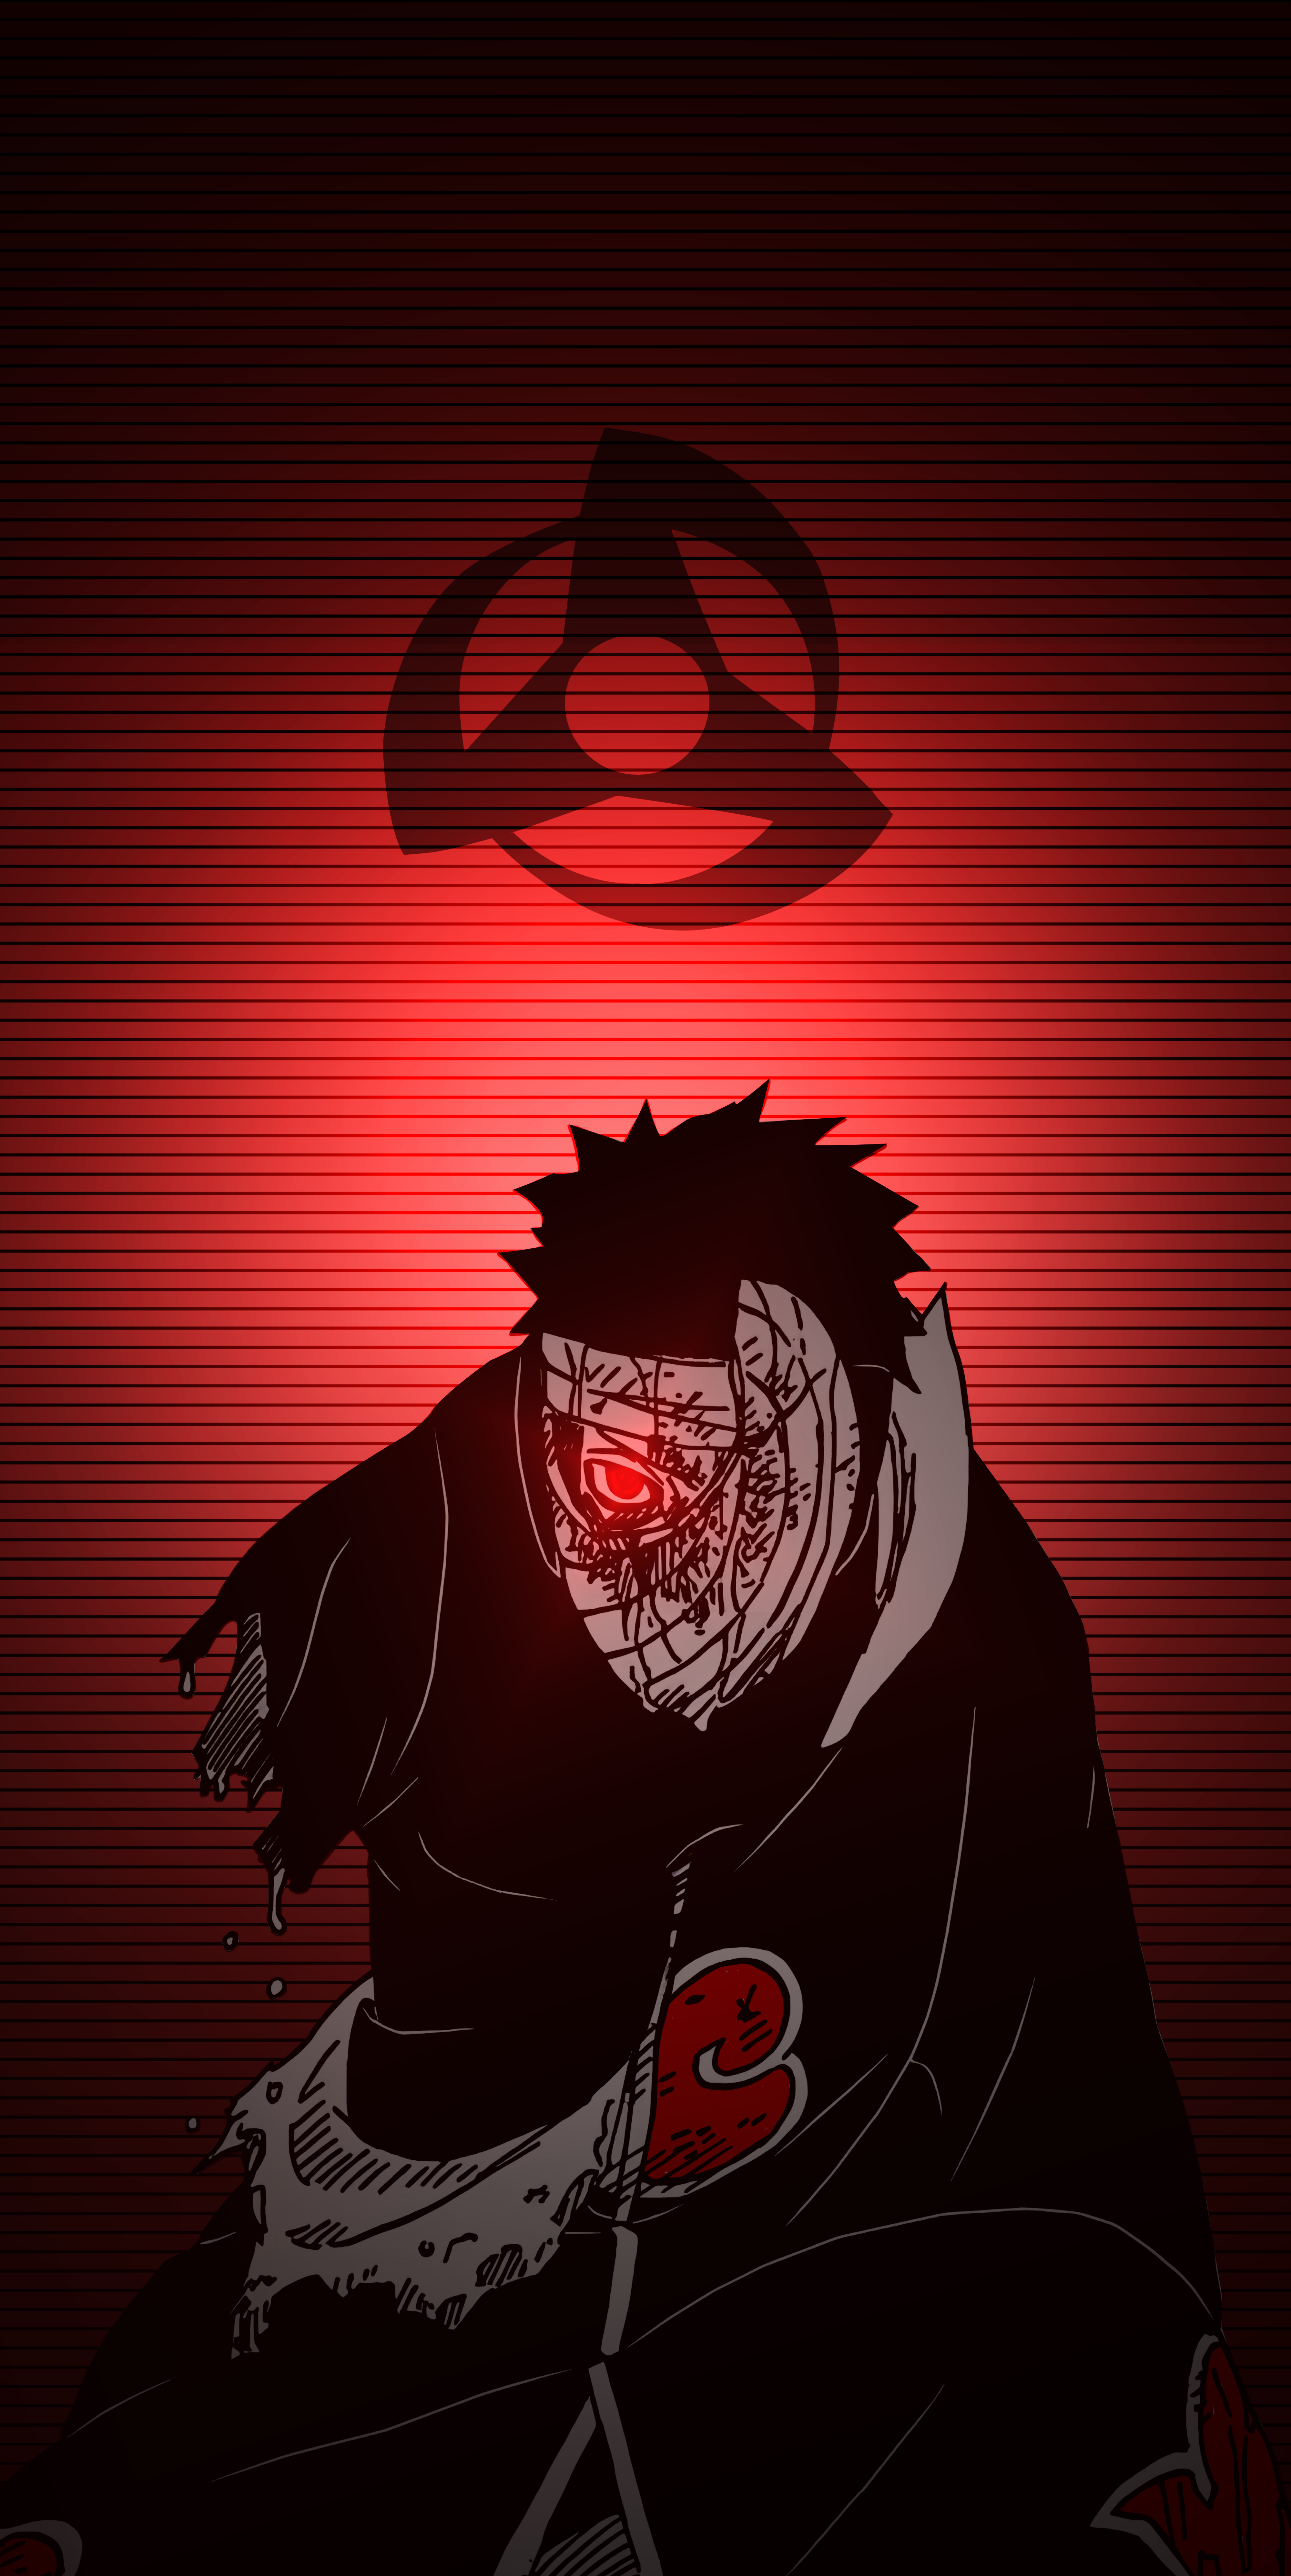 4k Obito Uchiha wallpaper Desktop, Android and iPhone - The